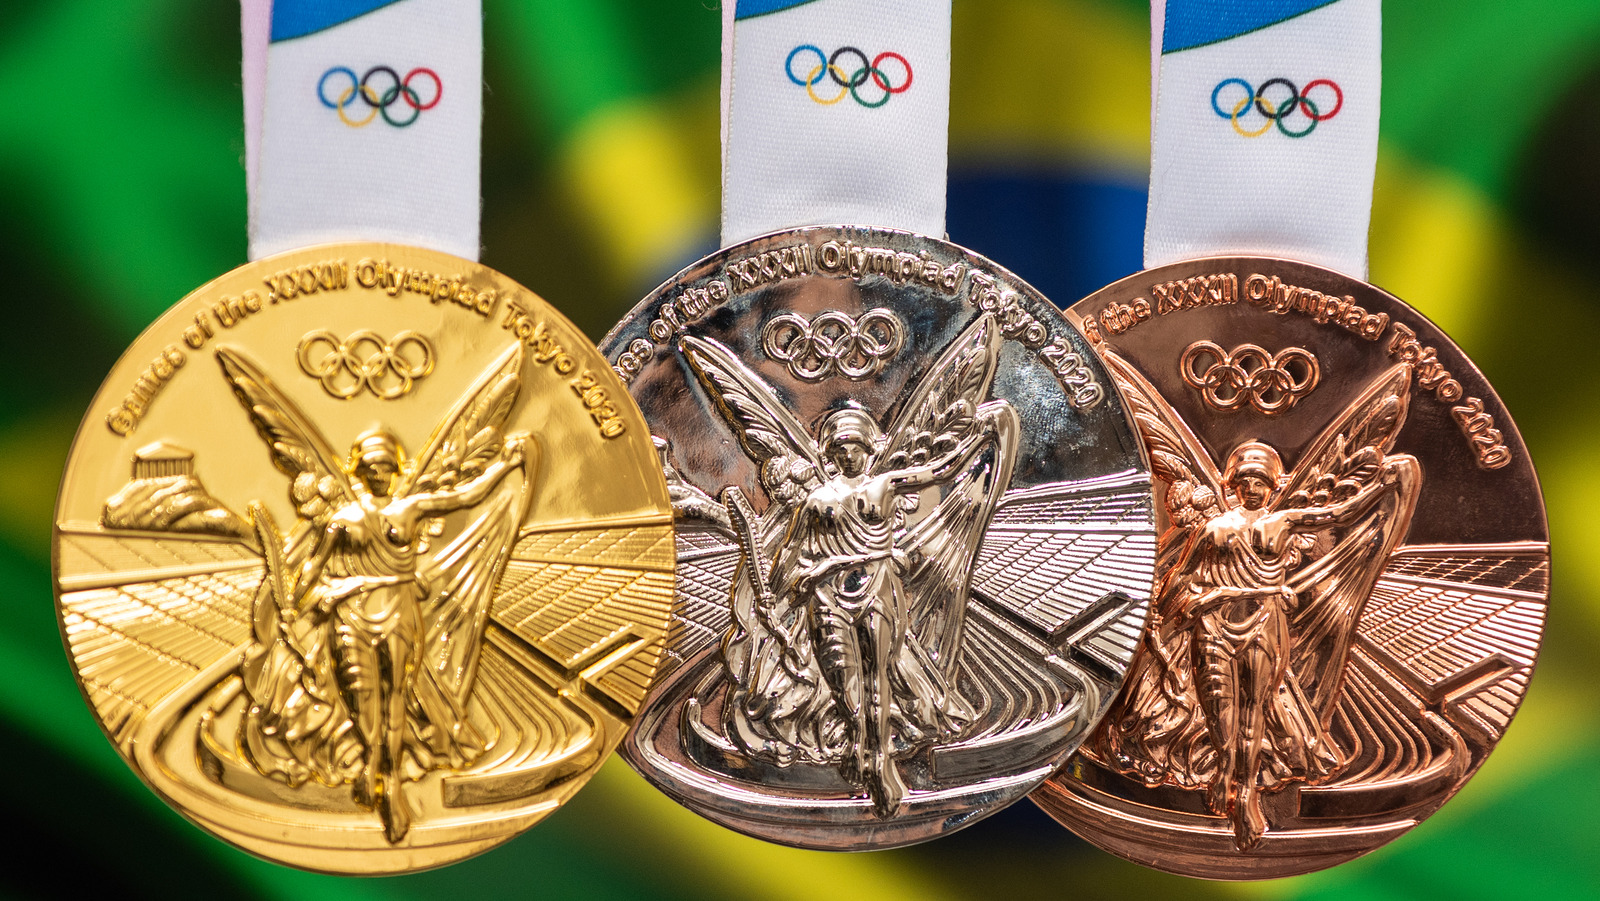 Here's Why A Silver Medal Is Actually Worse Than A Bronze